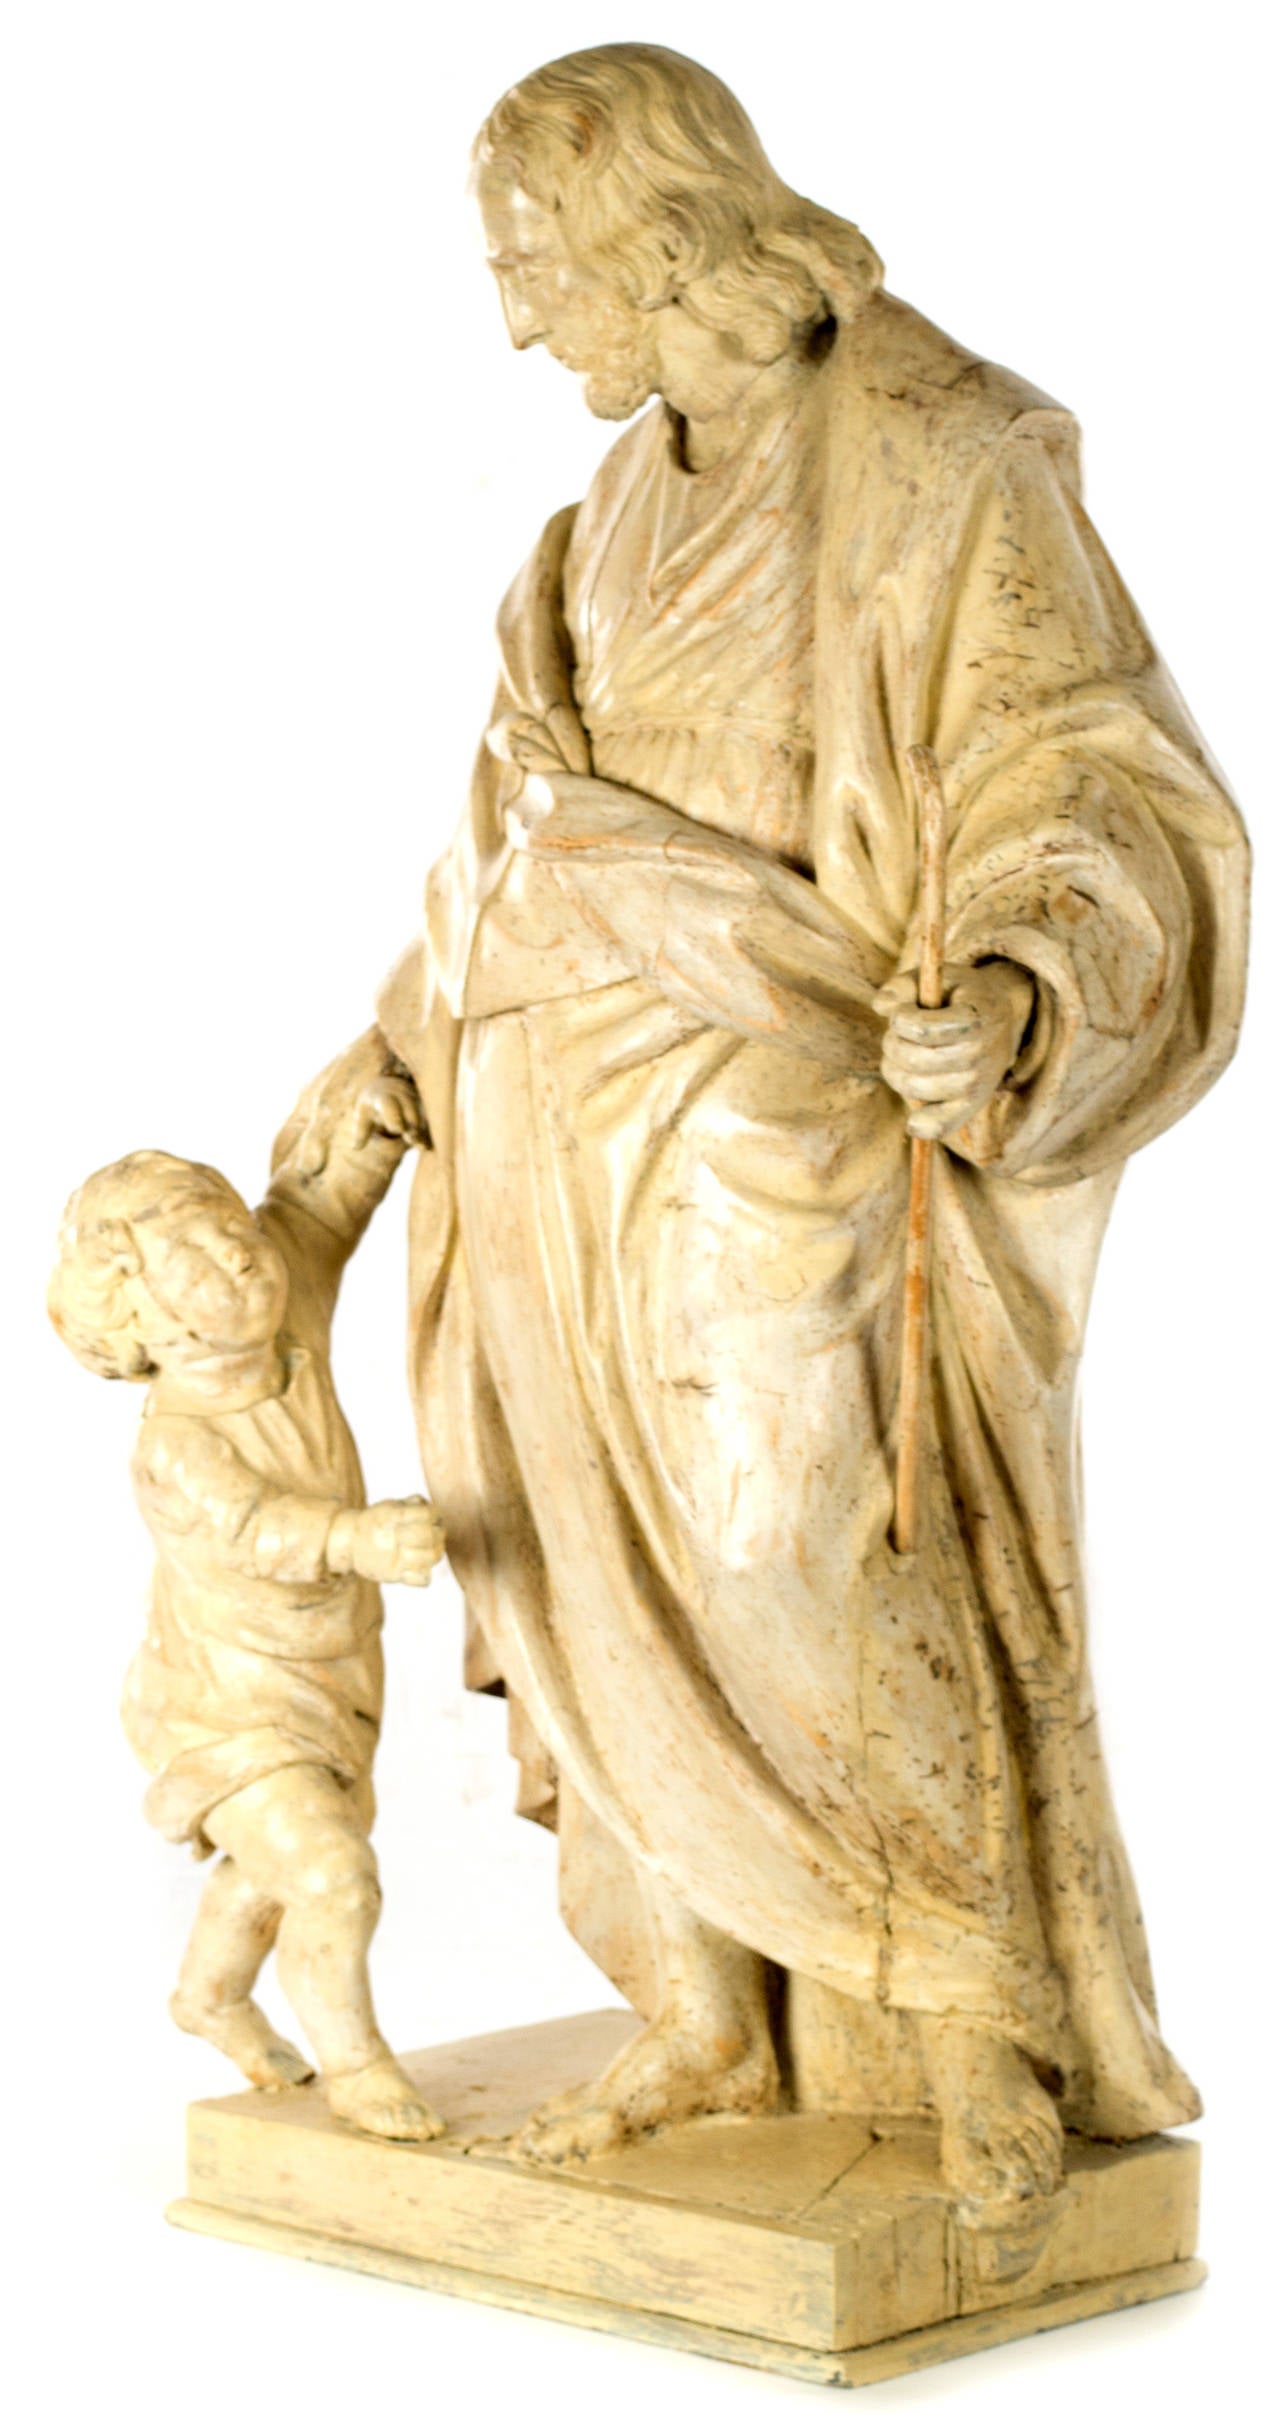 Holding a shepherd's crook in his left hand and comforting a child with his right, this nineteenth-century Italian statue depicts Christ as the Good Shepherd. The work is beautifully sculpted, using traditional techniques and materials dating from